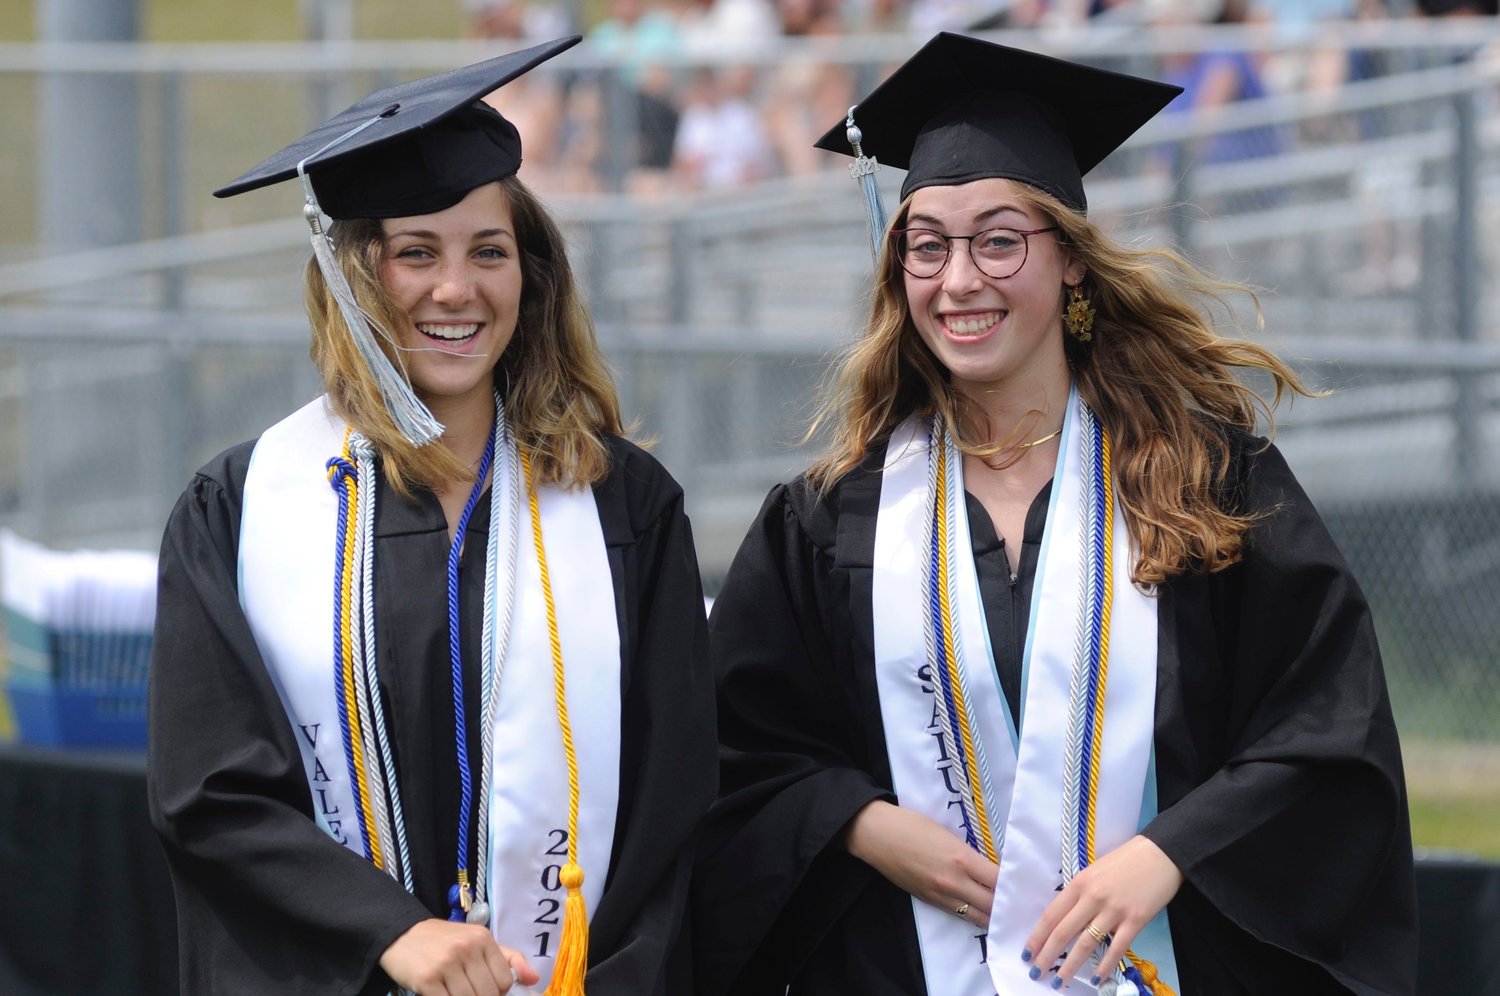 Wordsmiths. Jessica Schwalb, left, Class of 2021 valedictorian and Abigail Gaebel took center stage at the commencement ceremonies. Both graduated Summa Cum Laude, were members of the National Honor Society and Student Council, and were awarded Advanced Regents Diplomas with Honors.